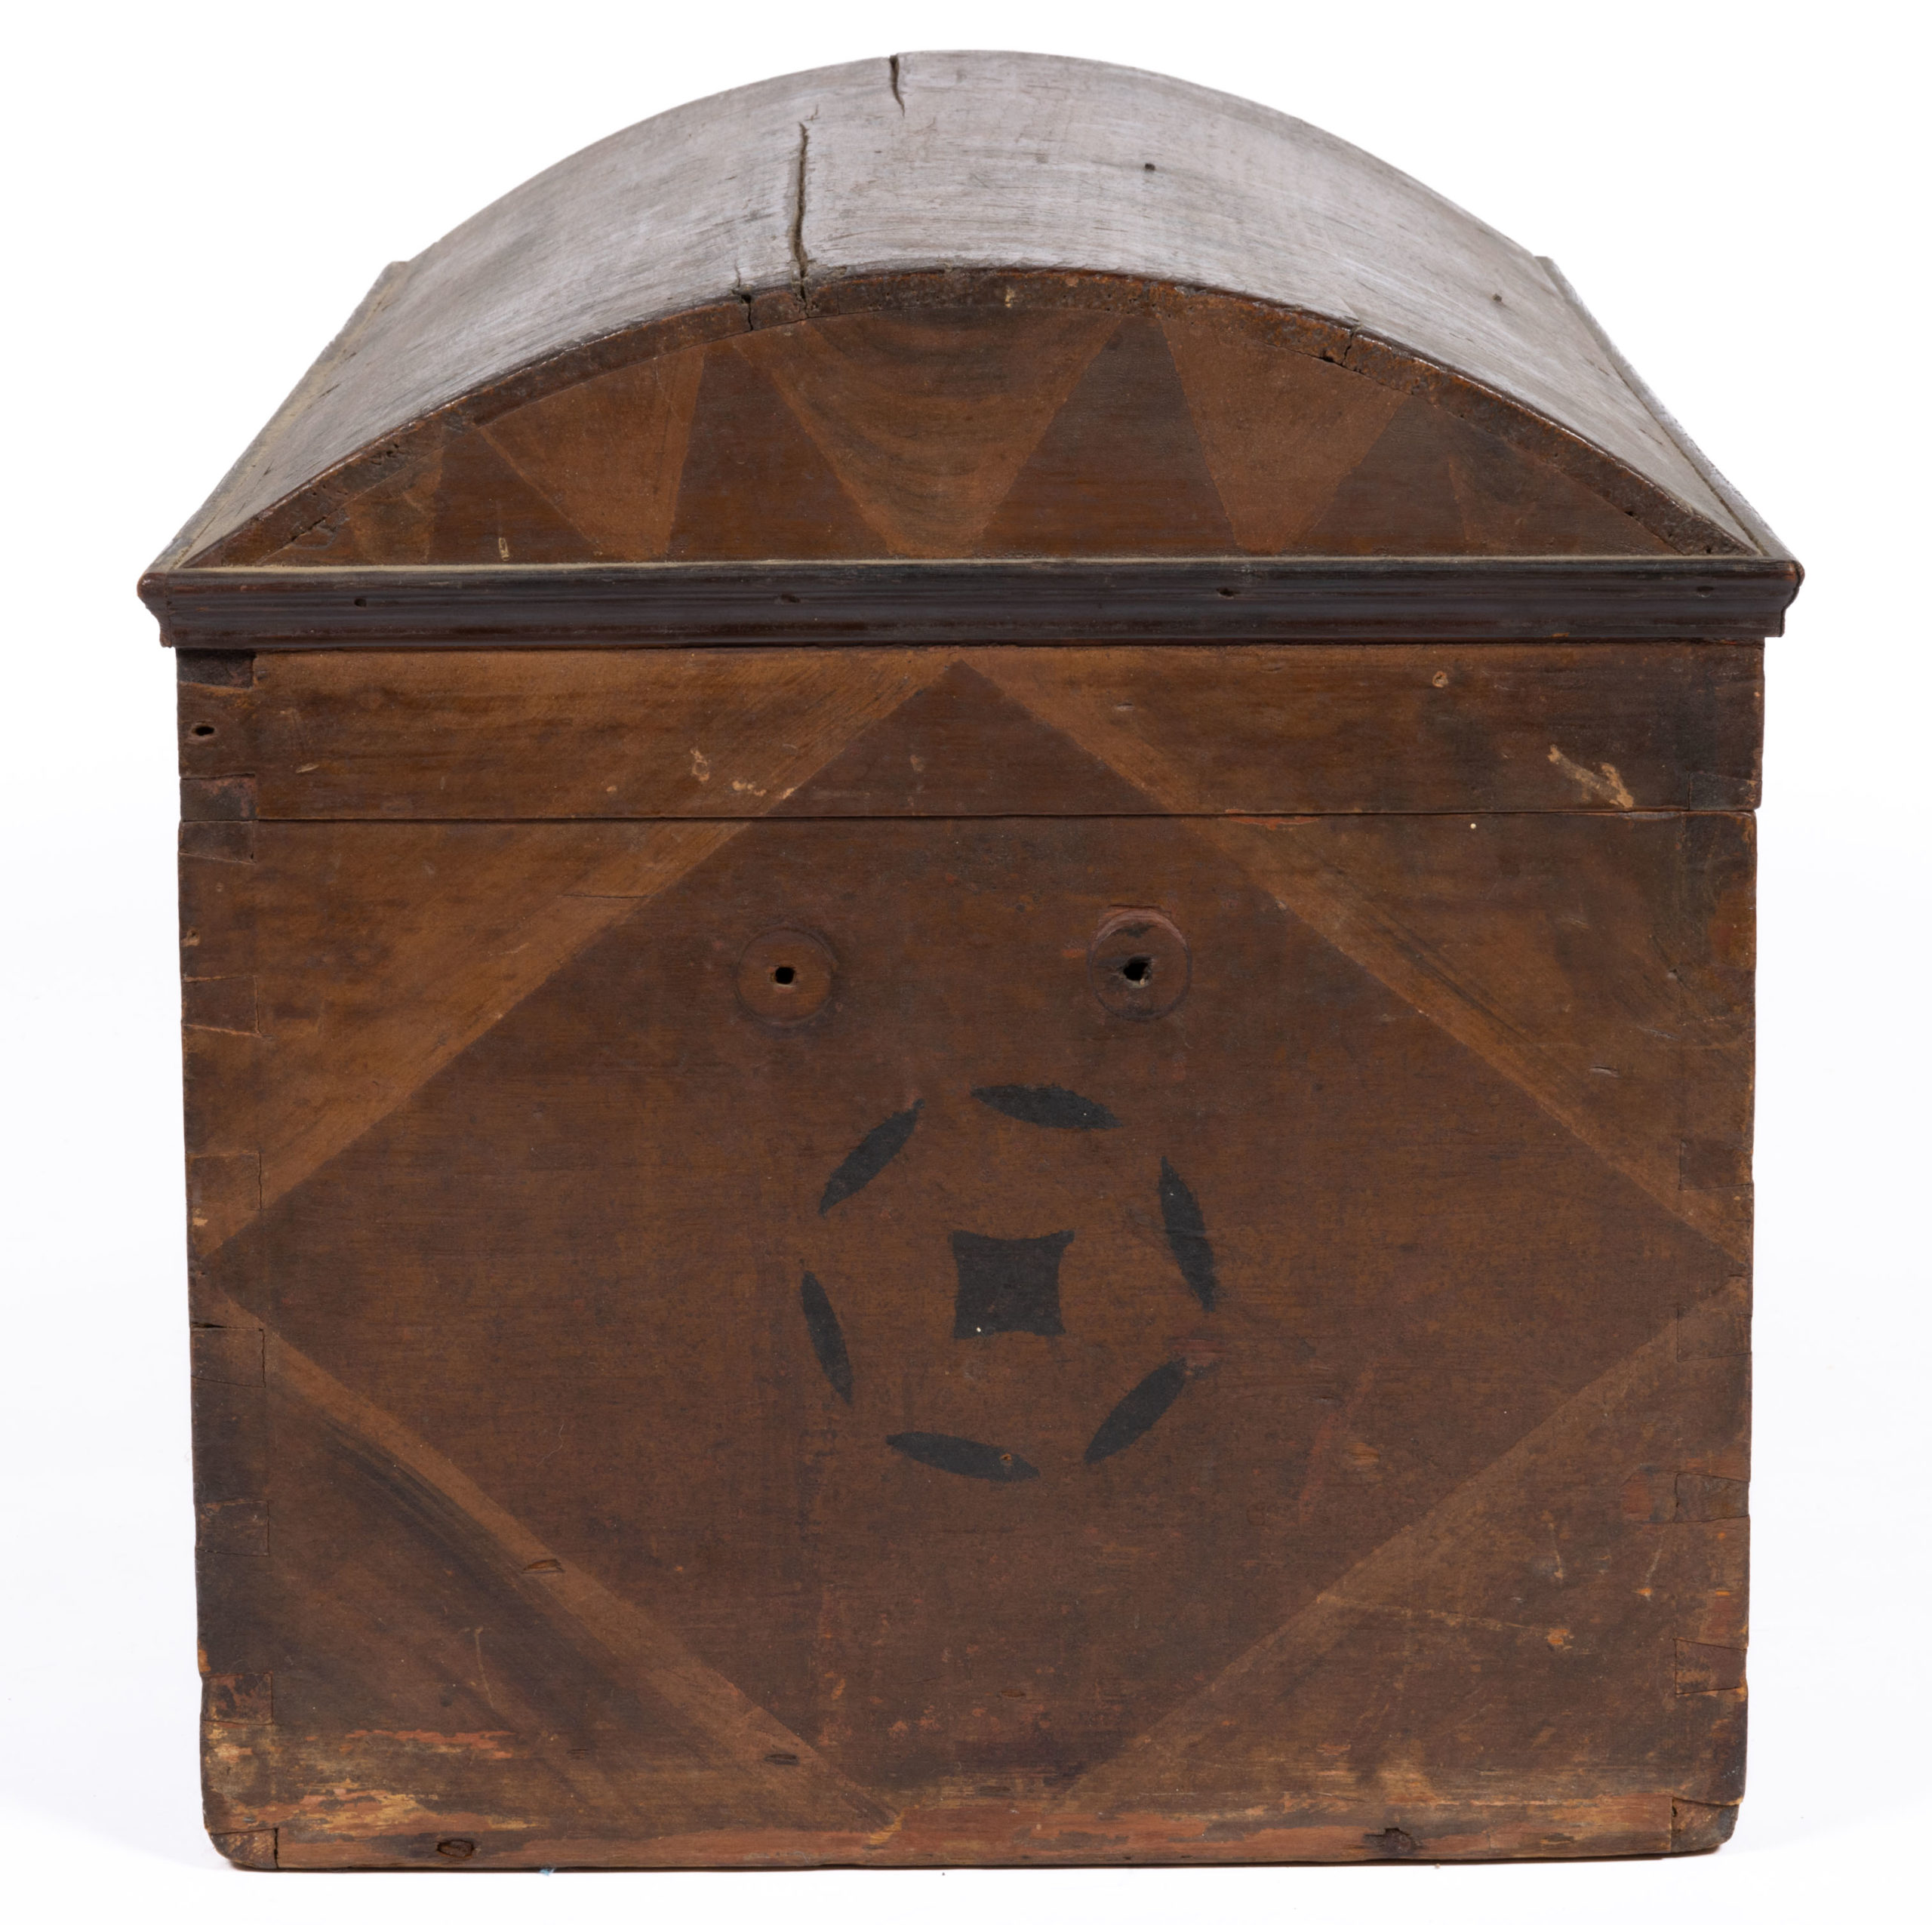 NEW ENGLAND PAINT-DECORATED DOME-TOP BOX,